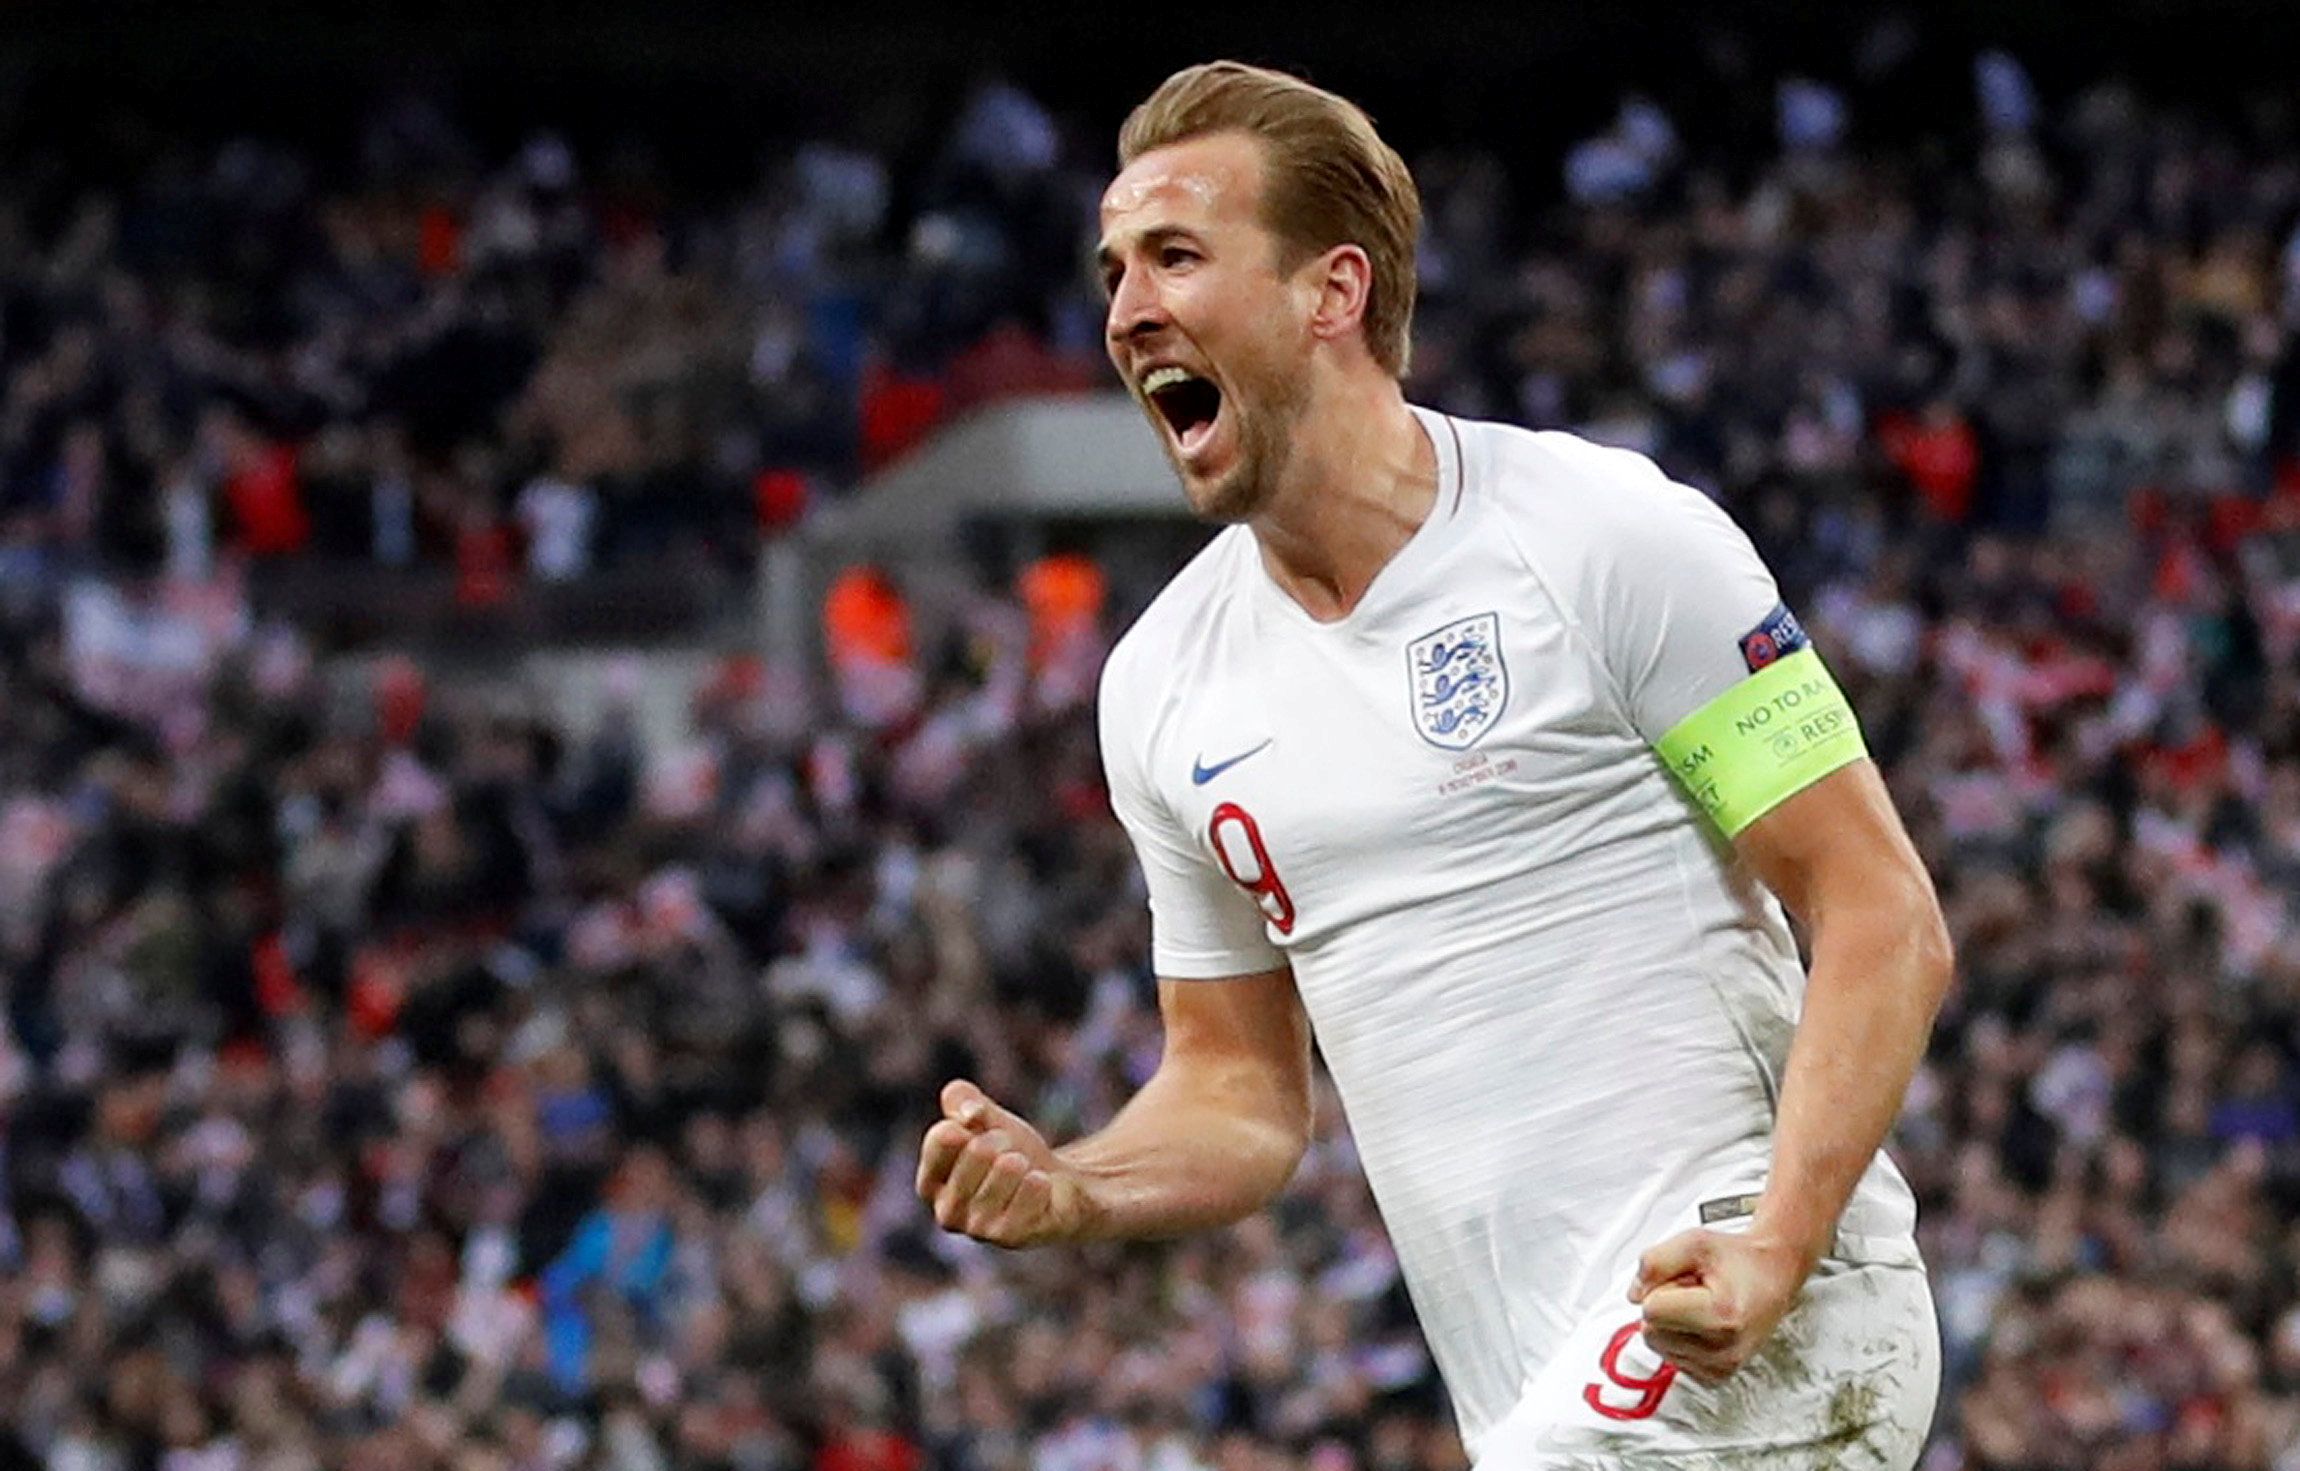 Soccer Football - UEFA Nations League - League A - Group 4 - England v Croatia - Wembley Stadium, London, Britain - November 18, 2018  England's Harry Kane celebrates scoring their second goal        Action Images via Reuters/Carl Recine     TPX IMAGES OF THE DAY